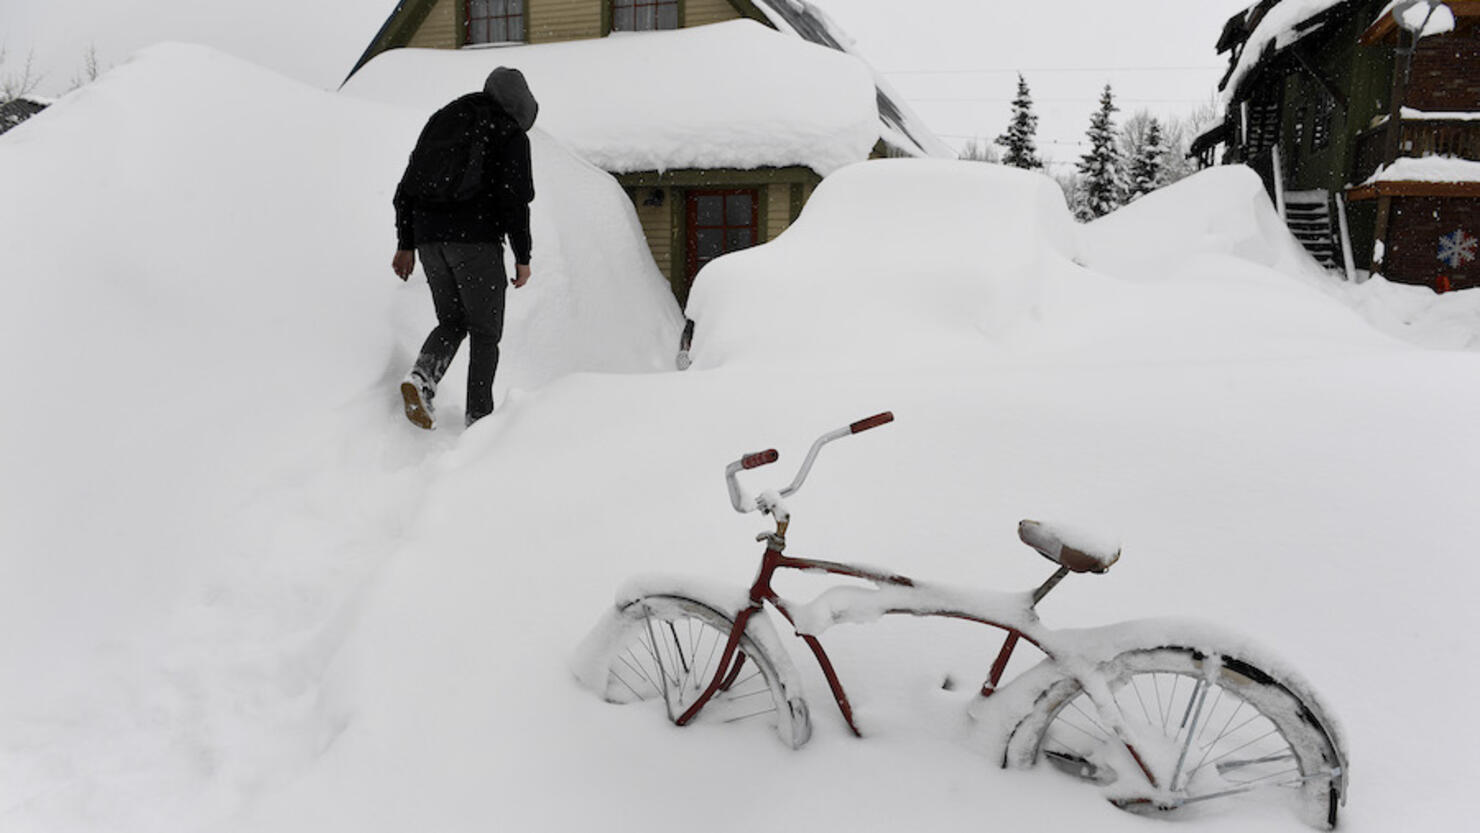 Over 7 feet of snow in Crested Butte, Colorado.